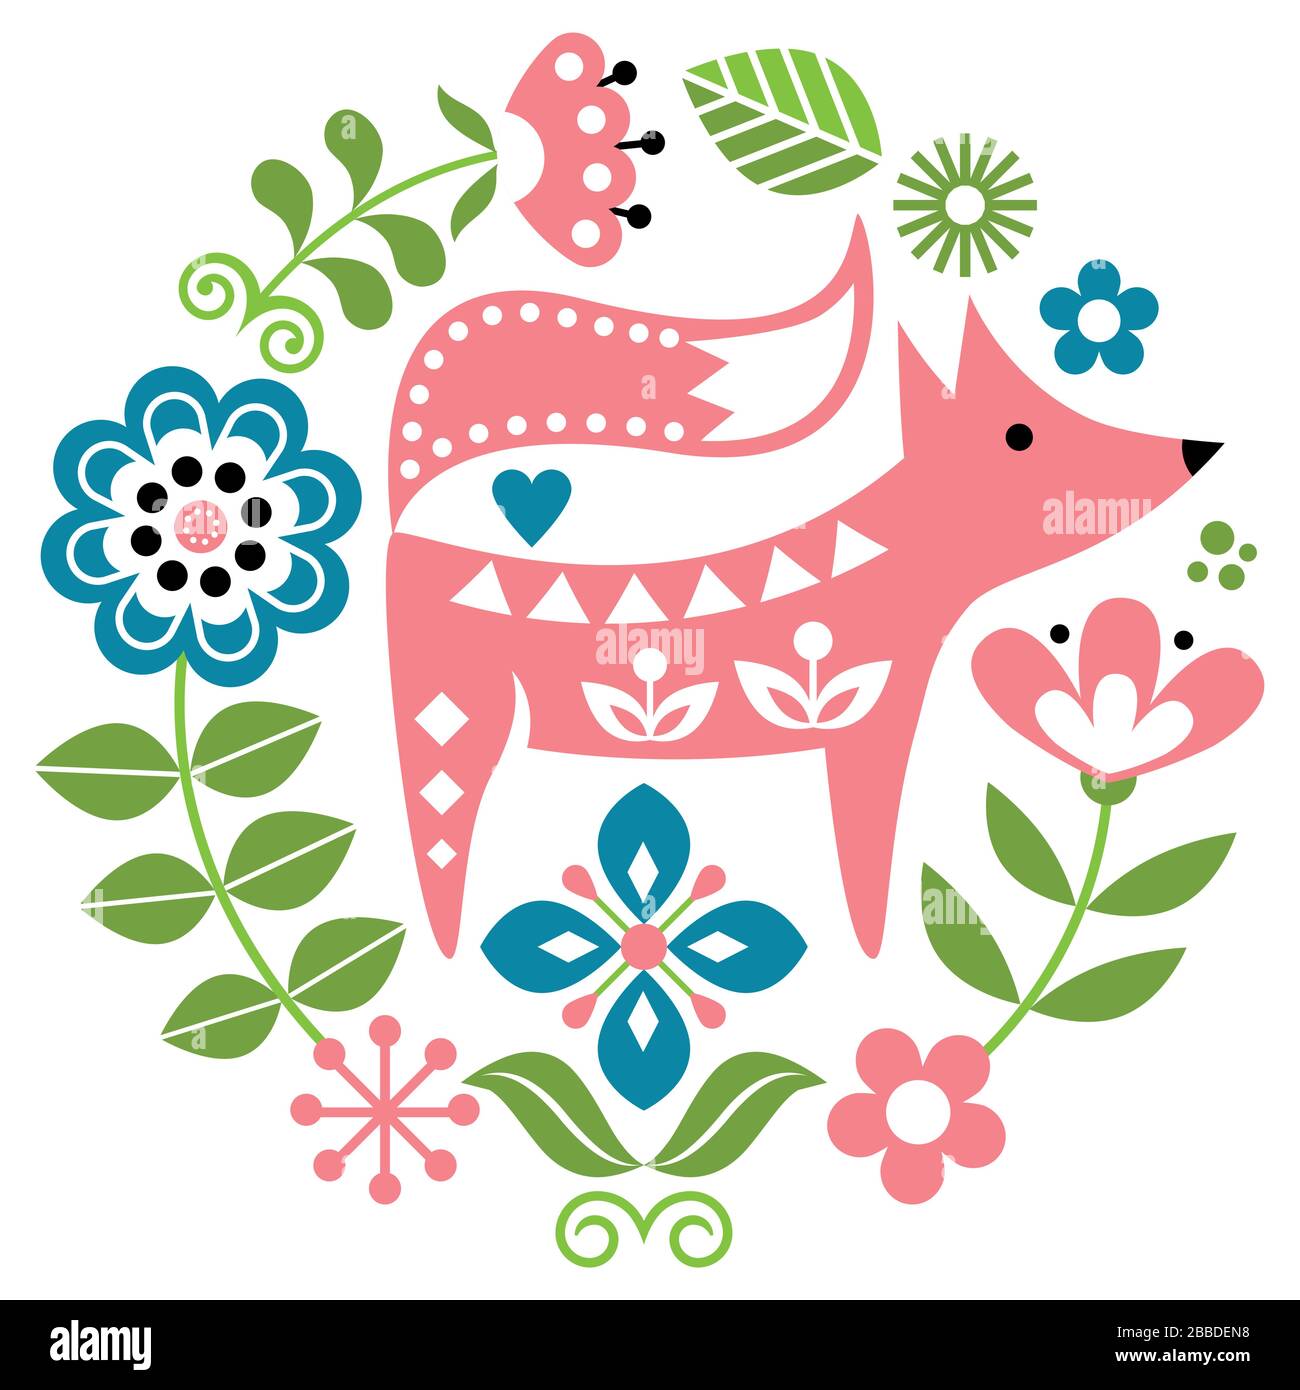 Scandinavian or Nordic folk art vector seamless pattern with flowers and fox, floral textile design inspired by traditional embroidery from Sweden, No Stock Vector